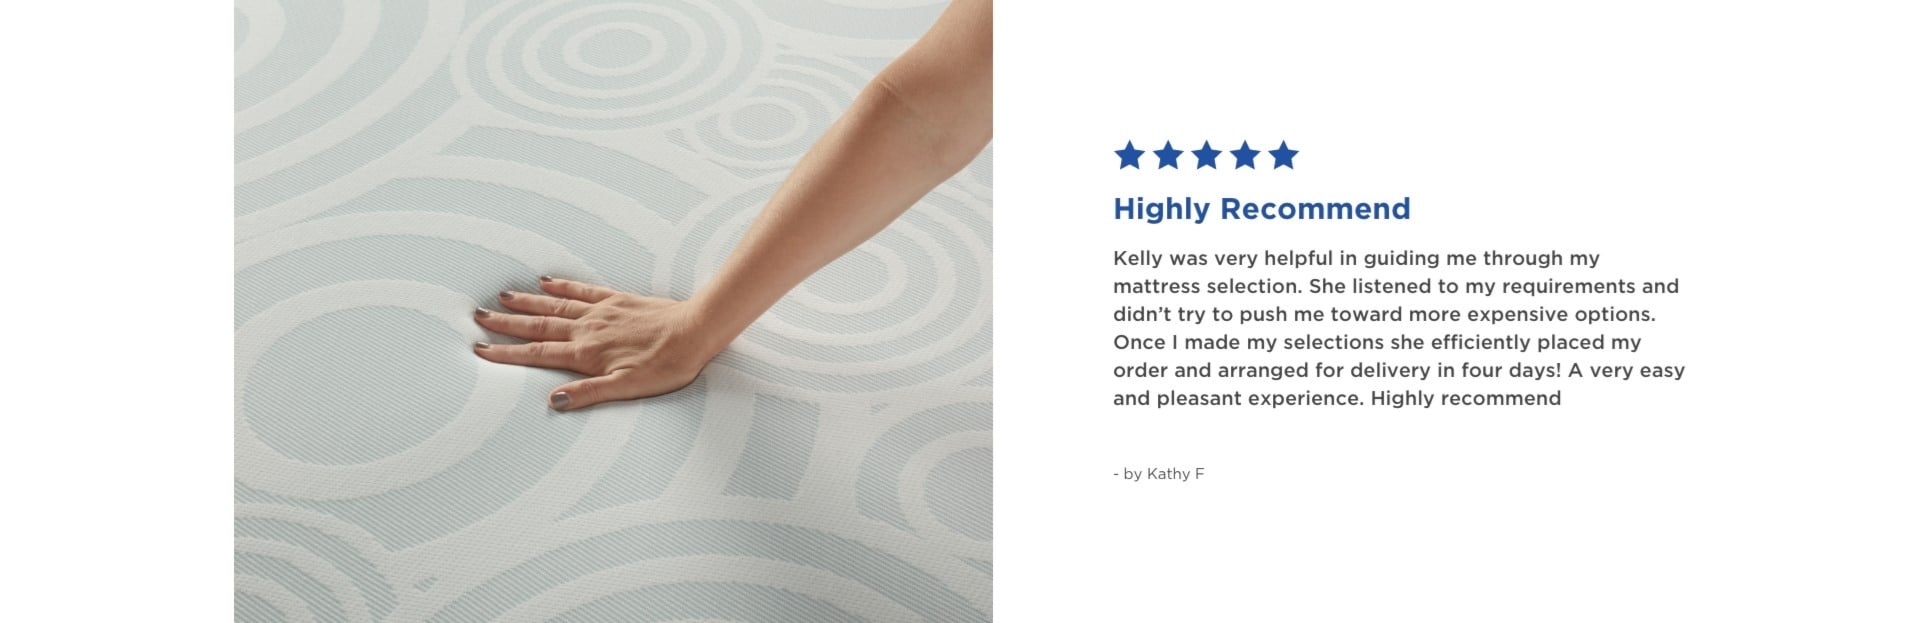 Highly Recommend | 5 Stars | Kelly was very helpful in guiding me through my mattress selection. She listened to my requirements and didn't try to push me toward more expensive options. Once I made my selections she efficiently placed my order and arranged for delivery in four days! A very easy and pleasant experience. Highly recommend - by Kathy F